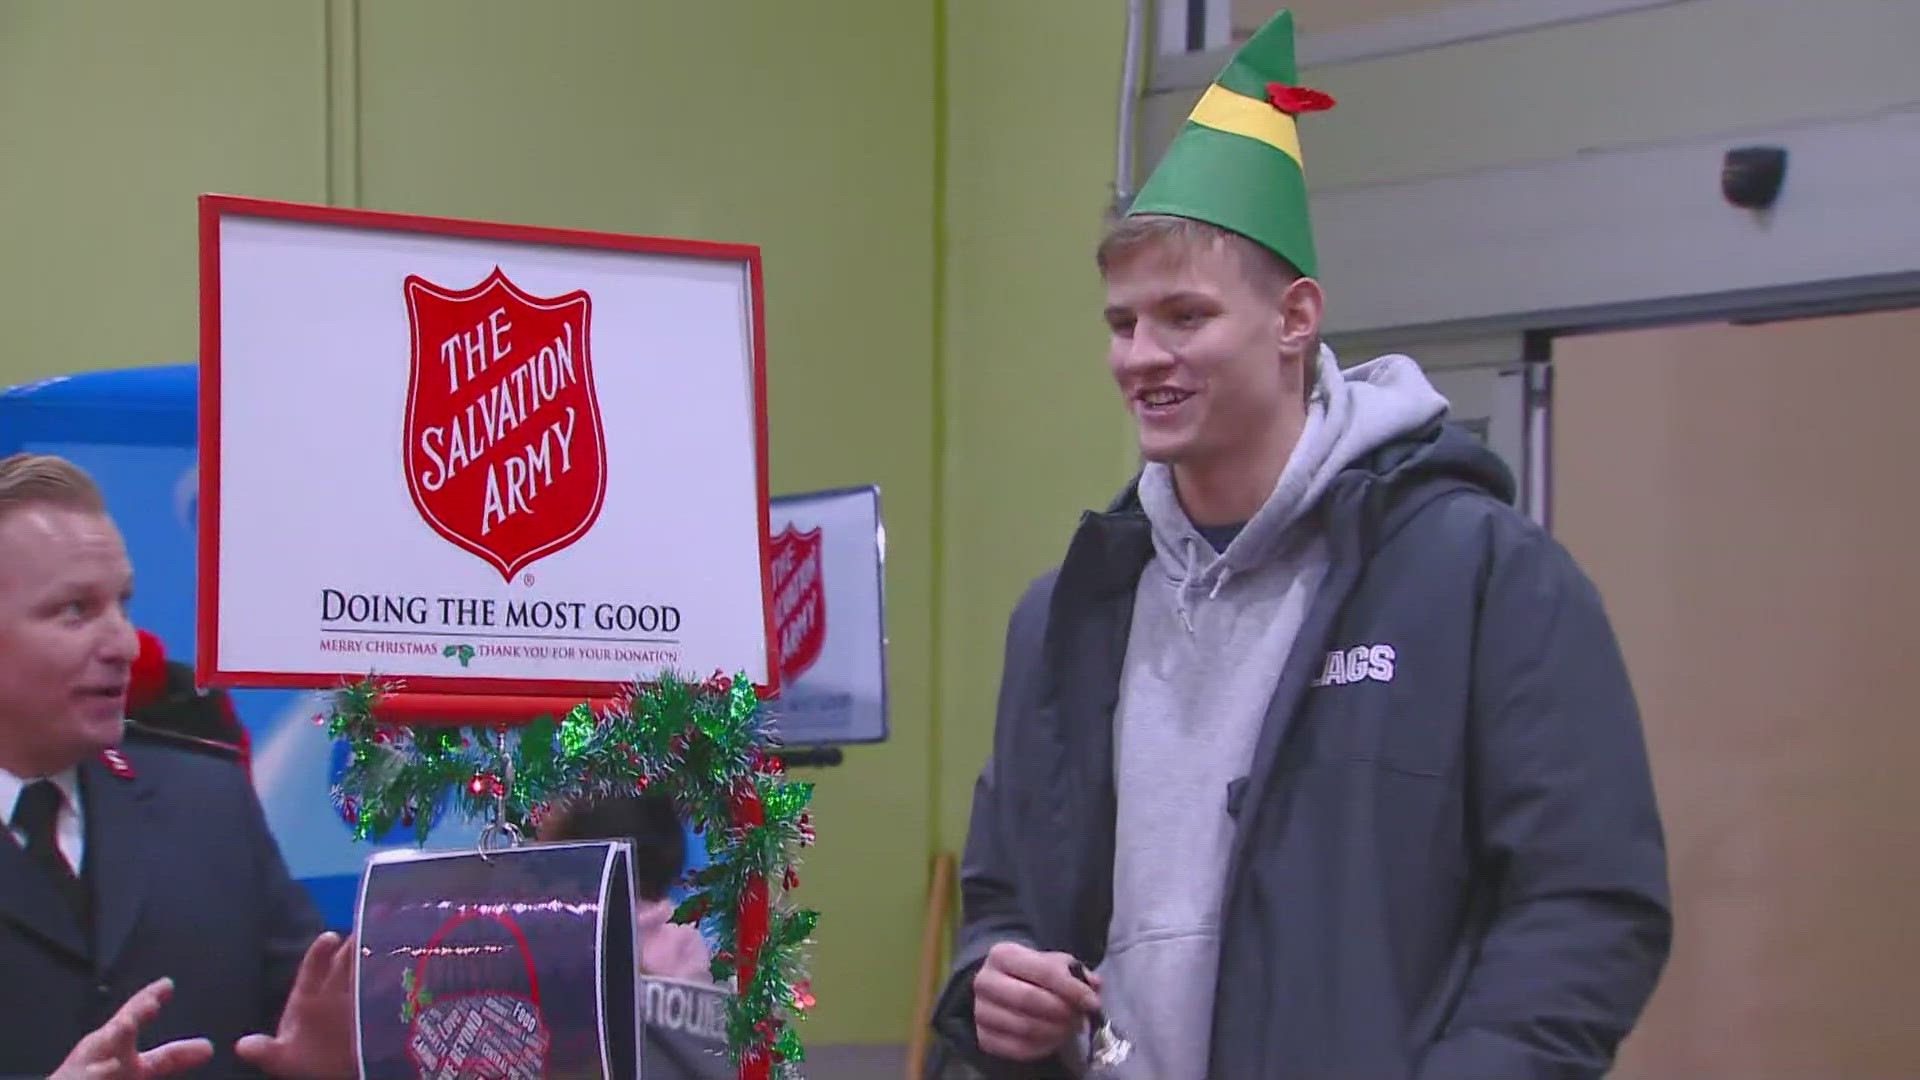 Gregg appeared at Fred Meyer to participate in the Salvation Army's iconic "Red Kettle" campaign.